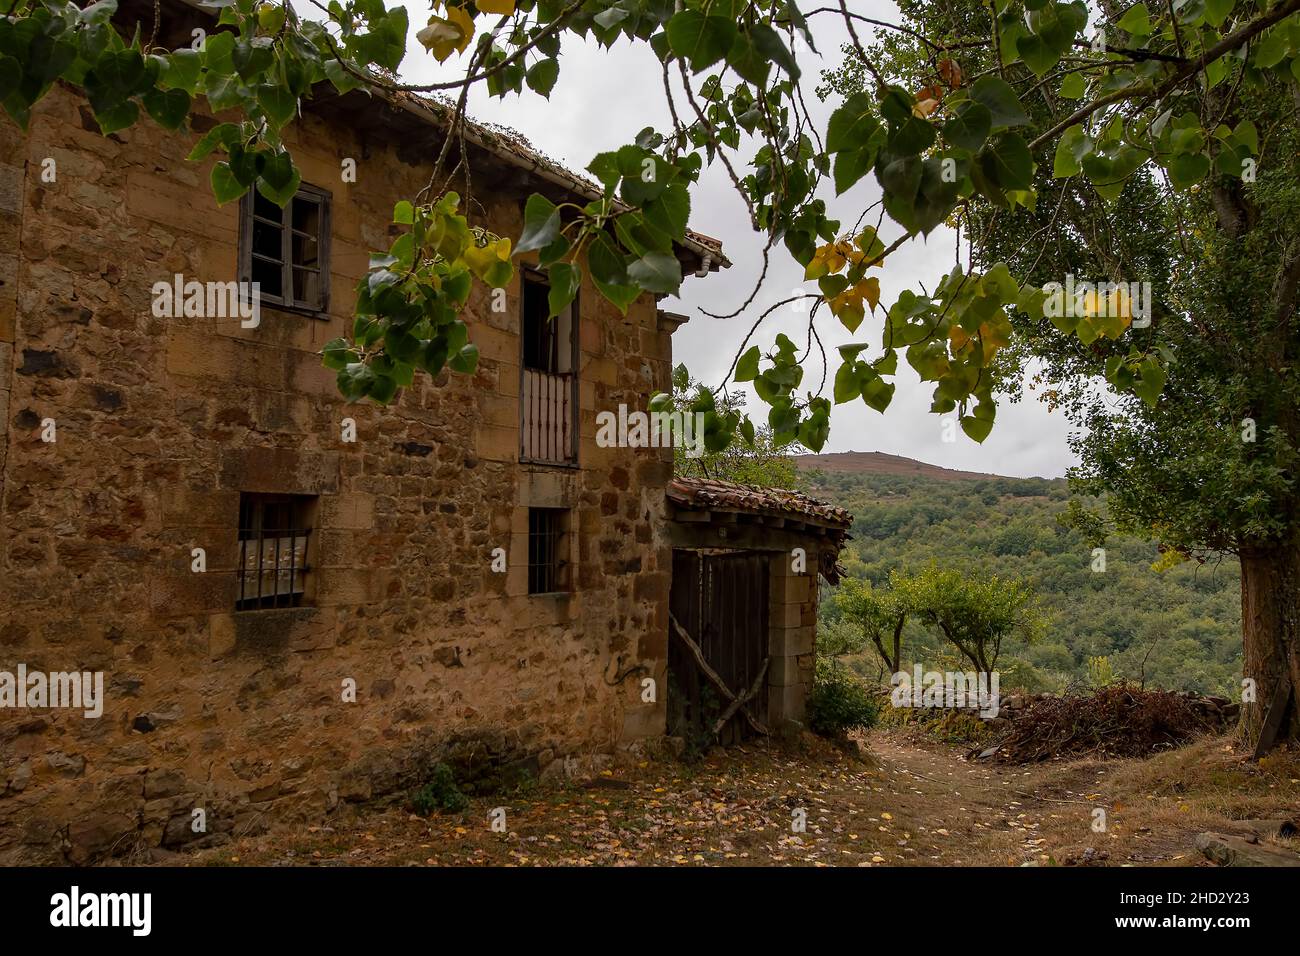 Small rural town of Loma Somera. Stock Photo